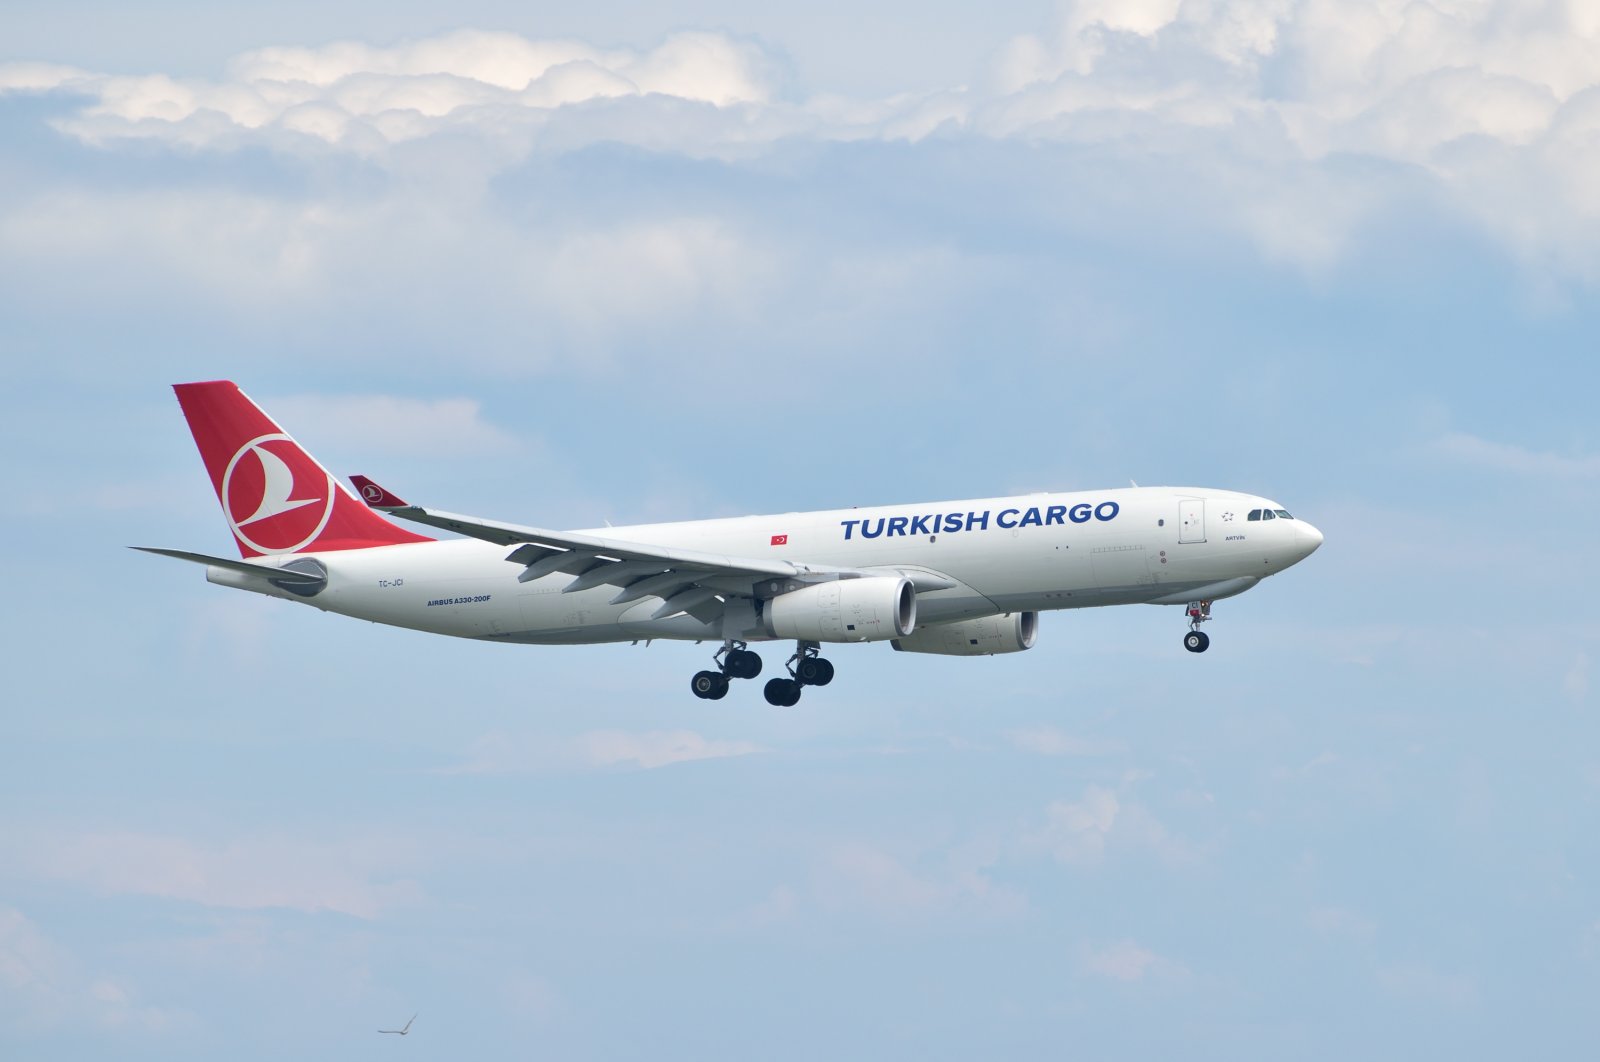 A Turkish Cargo aircraft makes a landing at the Atatürk Airport in Istanbul, Turkey on May 2, 2014. (Shutterstock Photo)